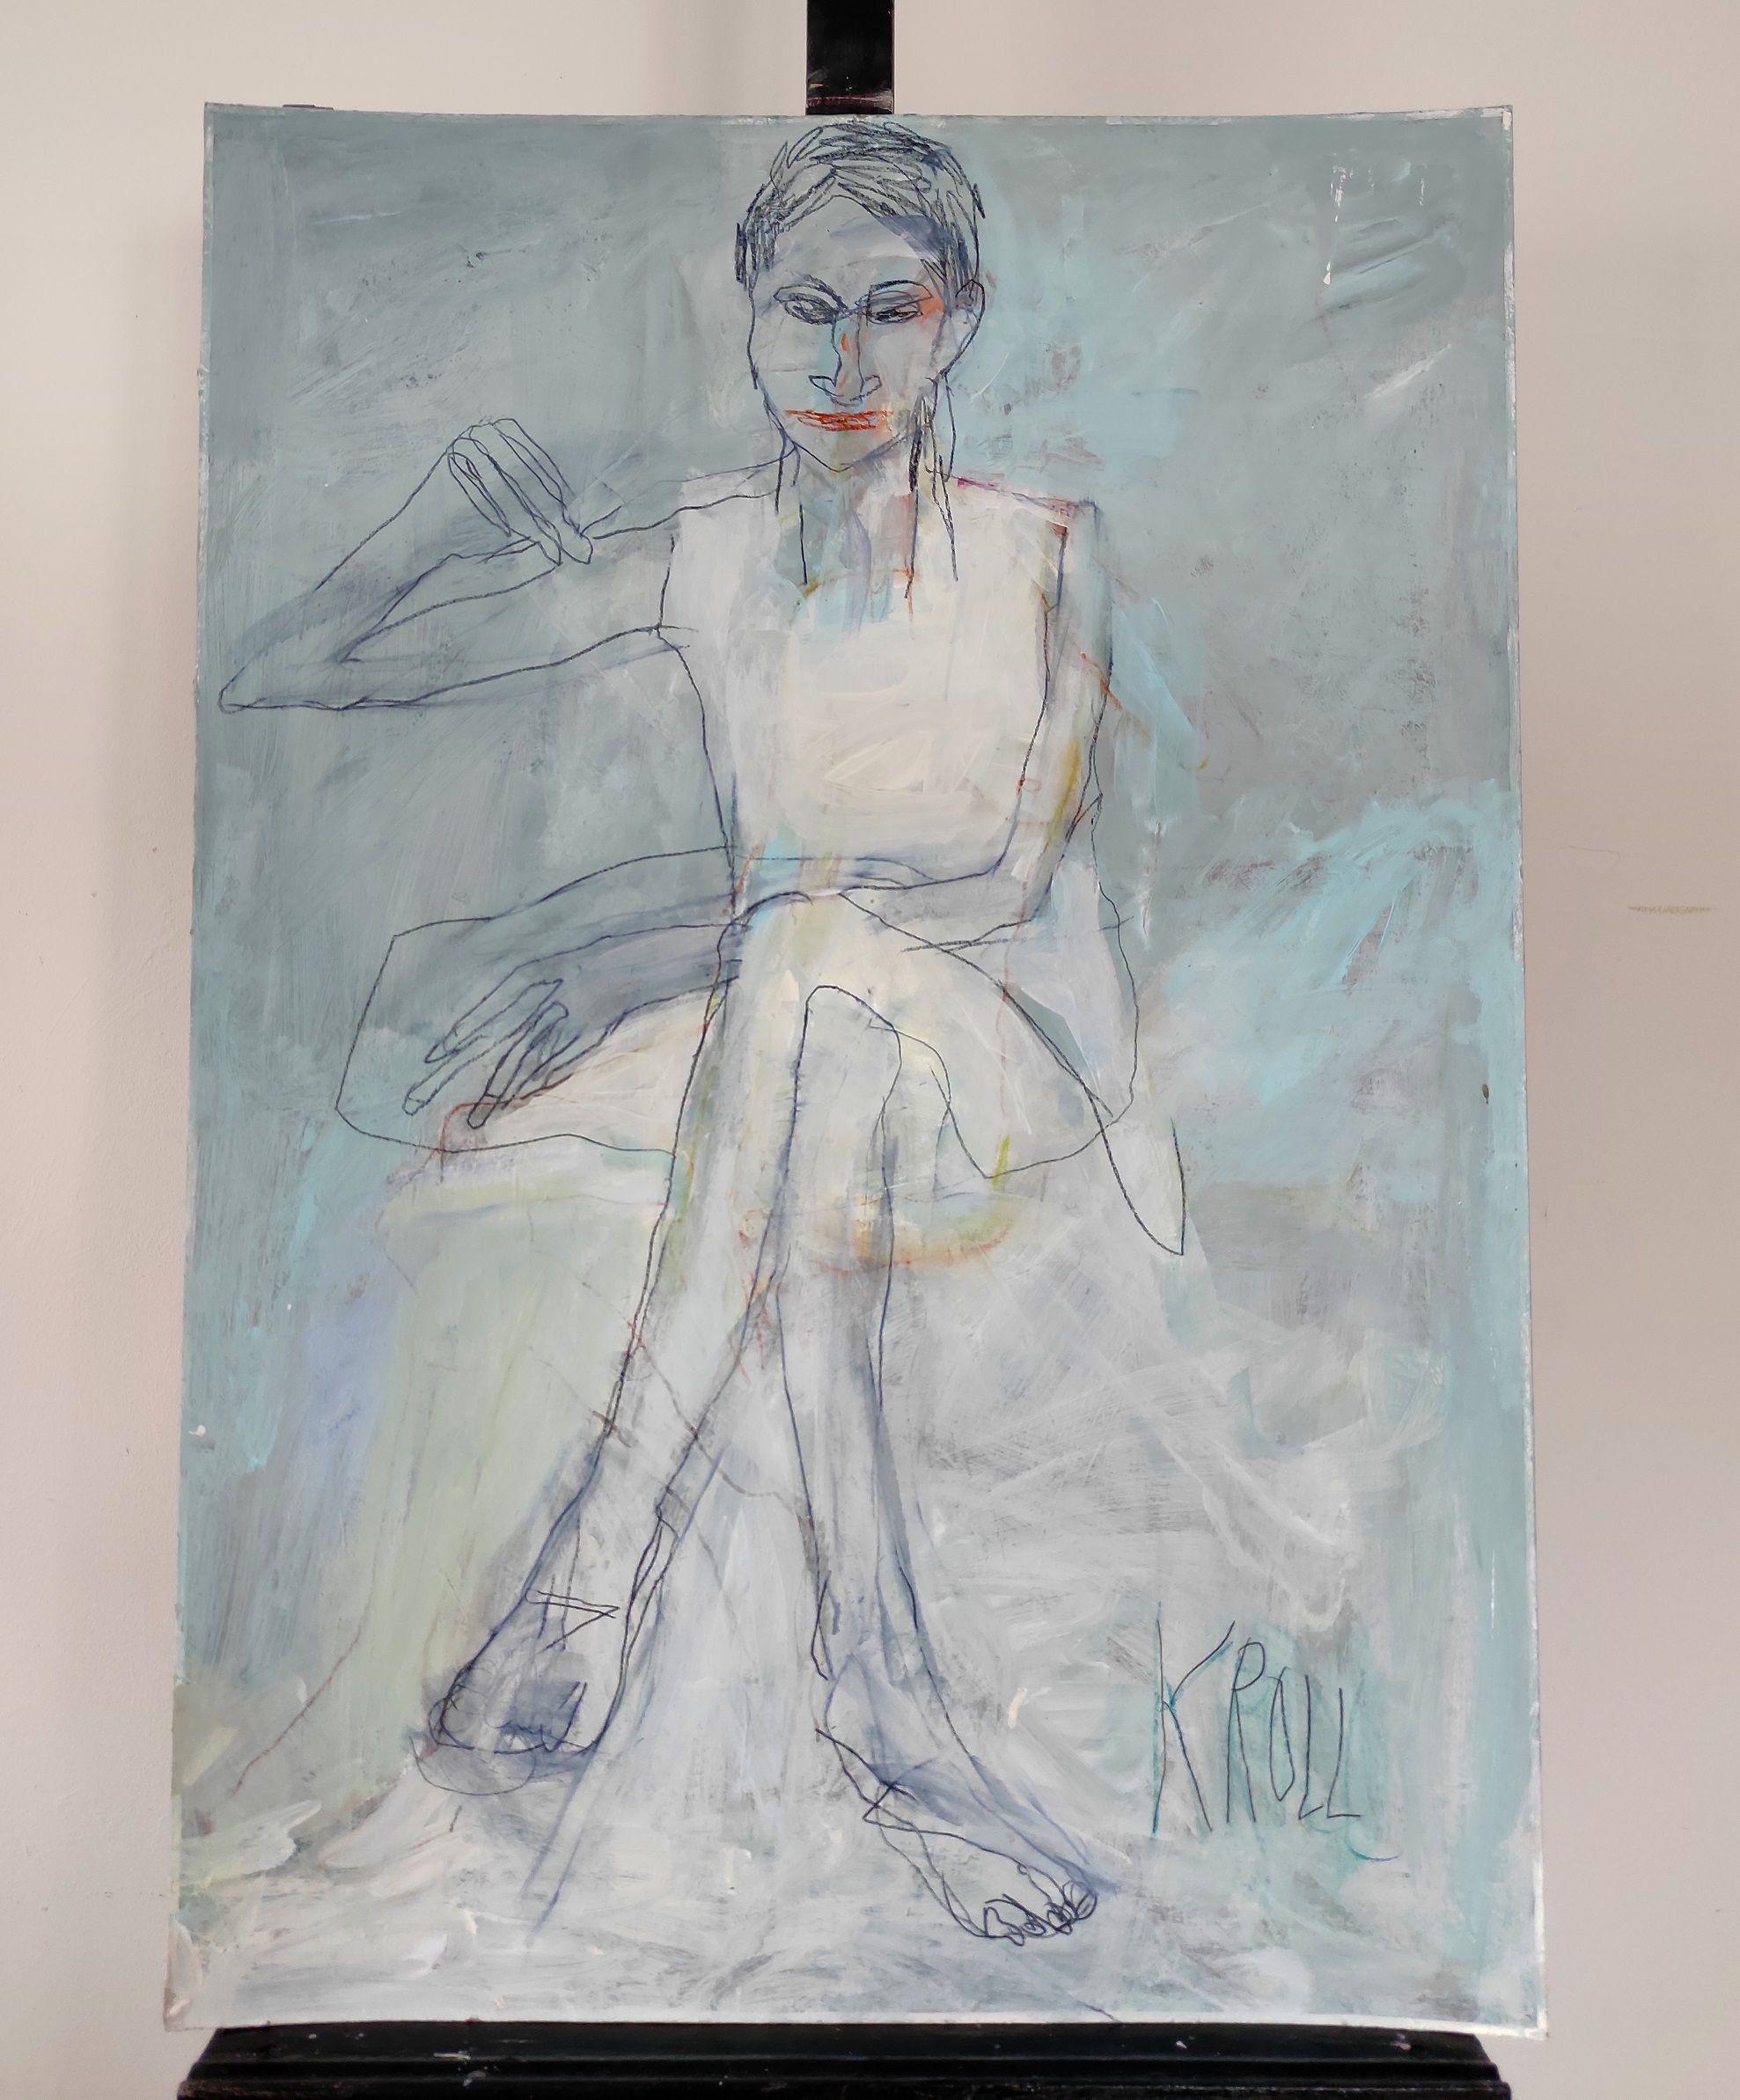 Sitting unknown, Drawing, Pencil/Colored Pencil on Paper - Expressionist Art by Barbara Kroll